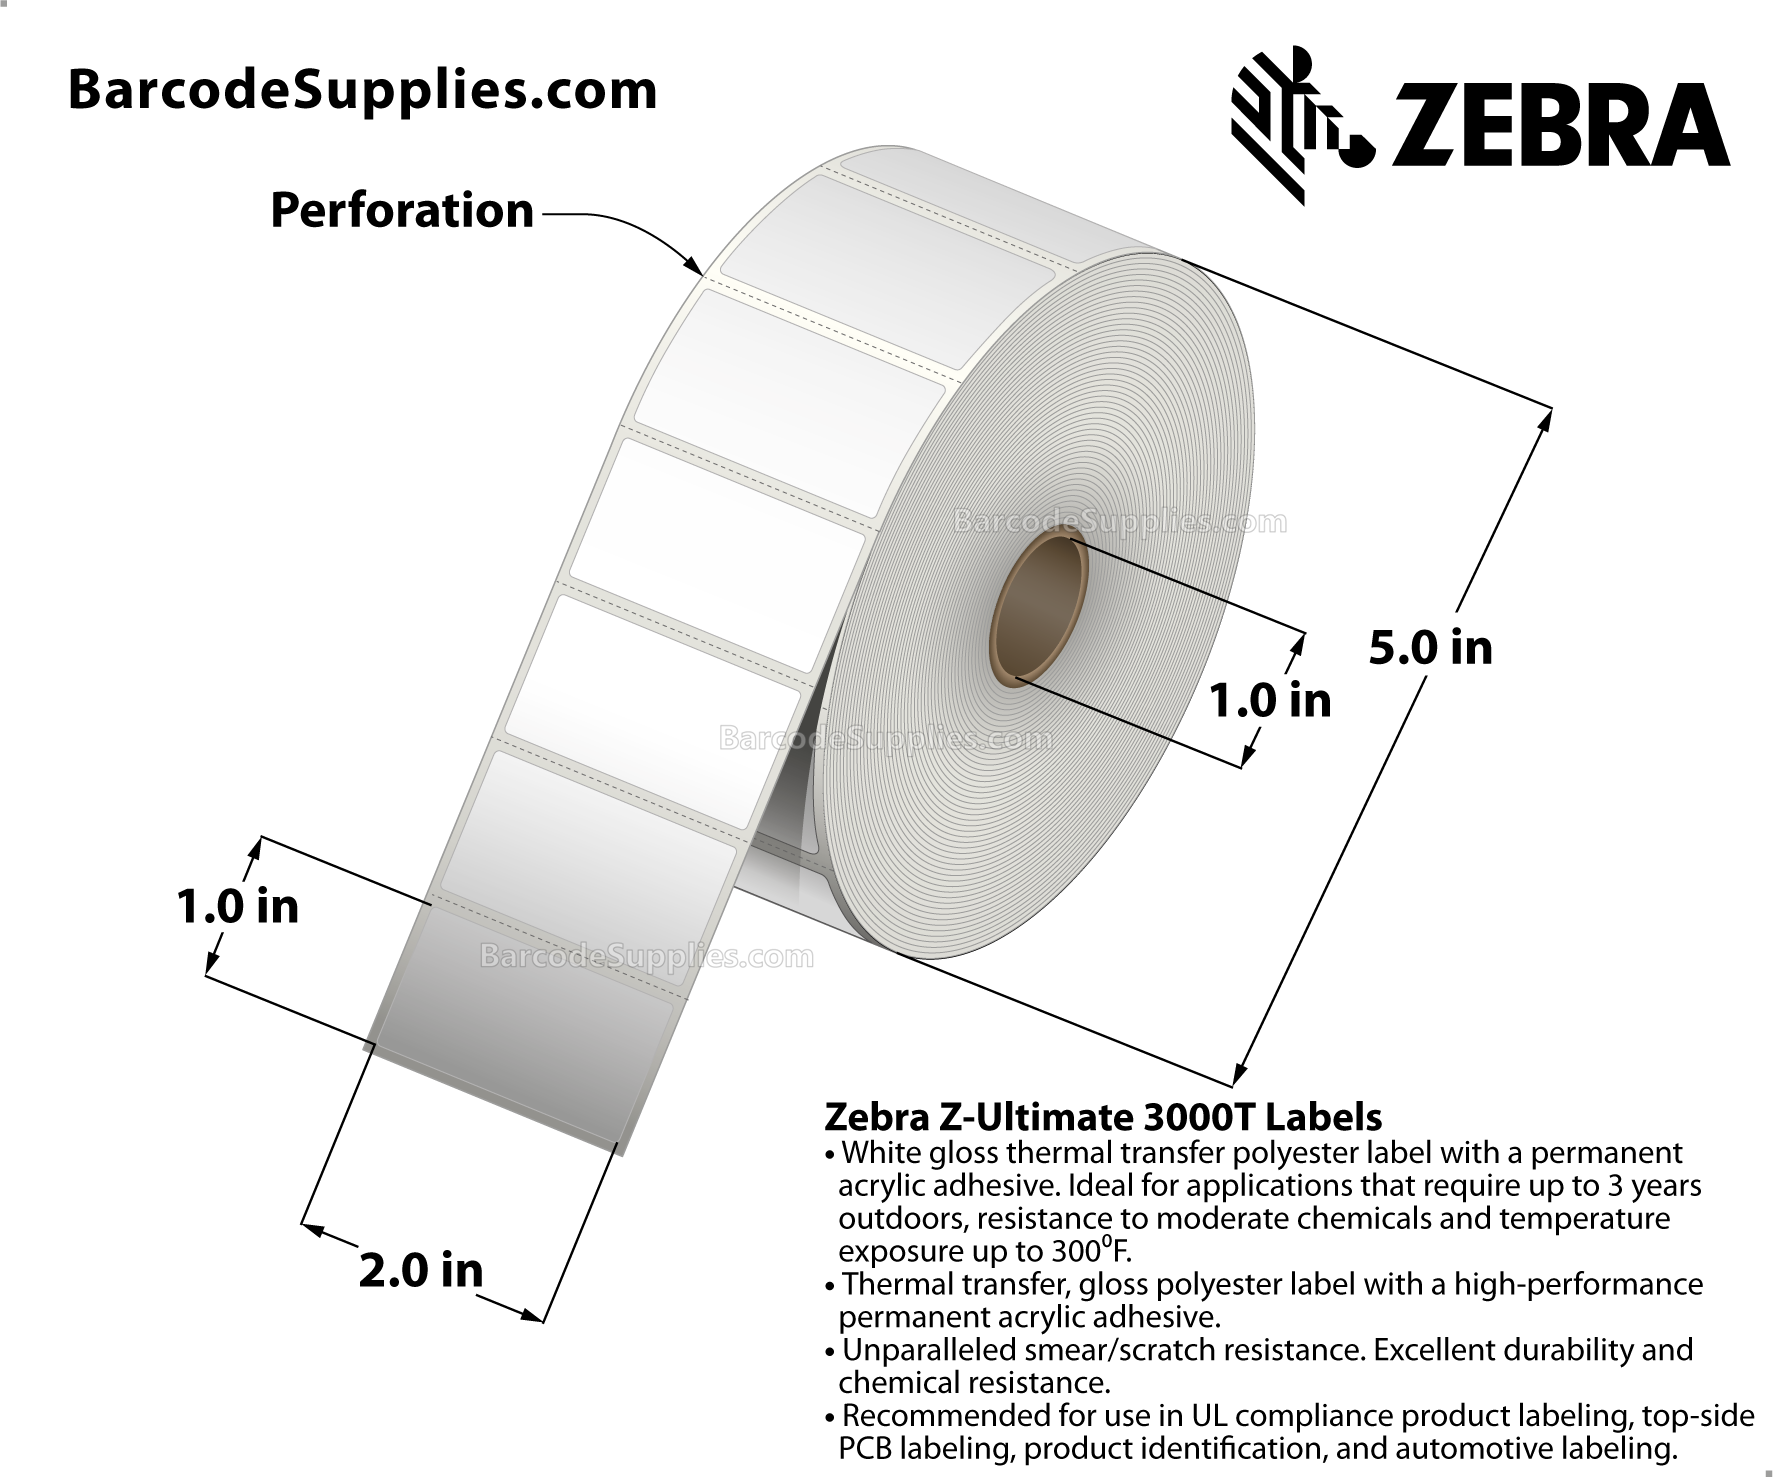 2 x 1 Thermal Transfer White Z-Ultimate 3000T Labels With Permanent Adhesive - Perforated - 2530 Labels Per Roll - Carton Of 12 Rolls - 30360 Labels Total - MPN: 17157